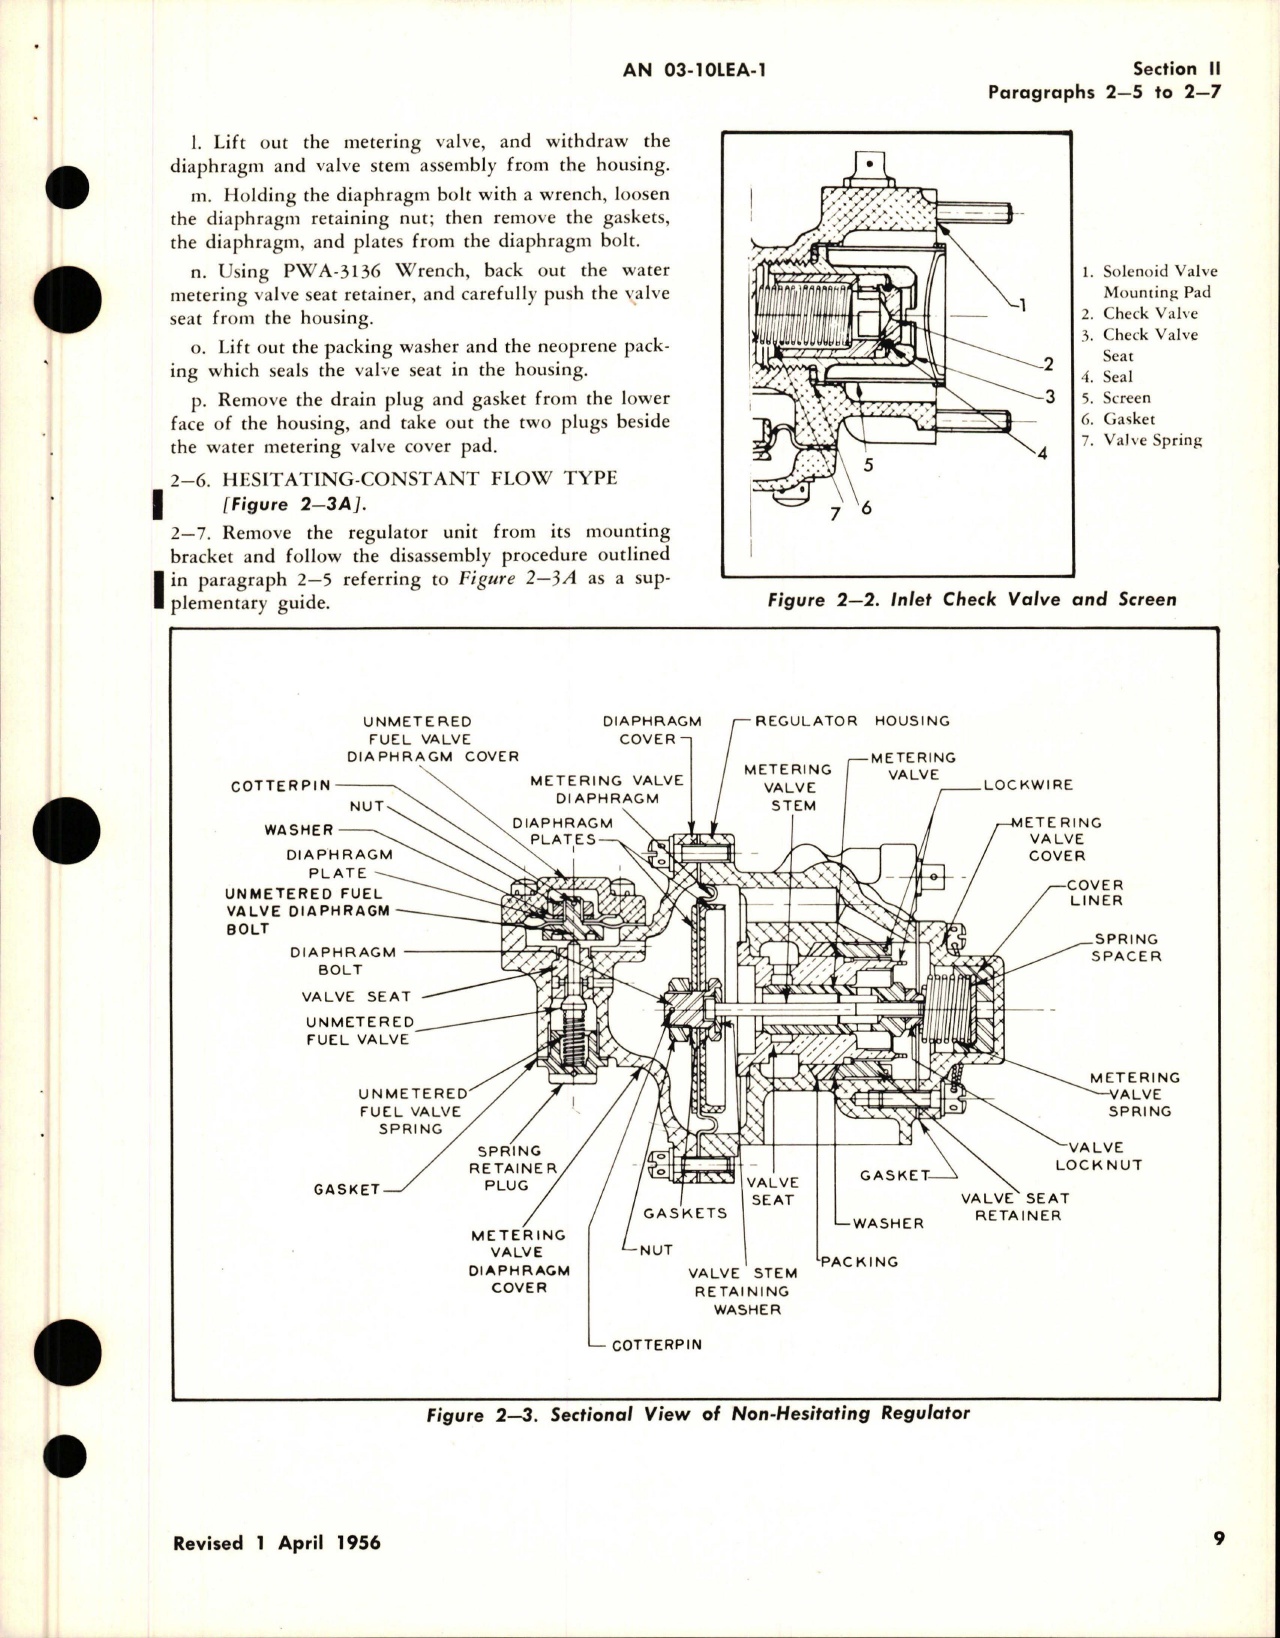 Sample page 7 from AirCorps Library document: Overhaul Instructions for Water Regulators